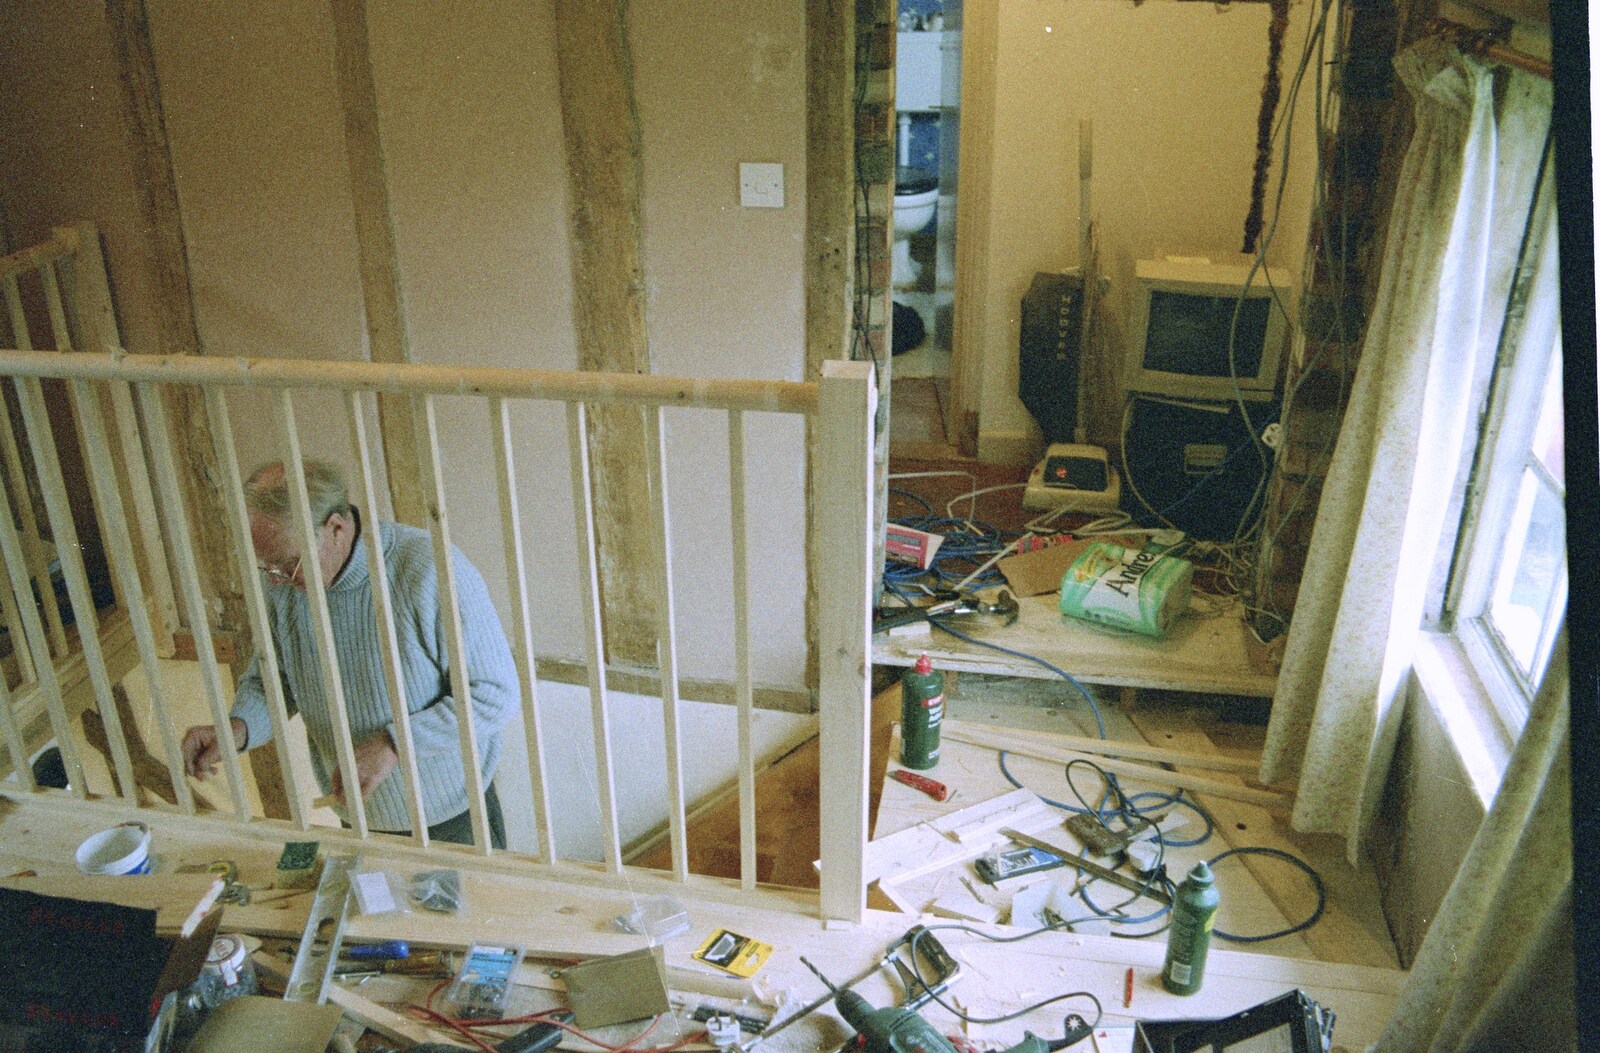 New bannisters at the top of the stairs from 3G Lab, and Building a Staircase, Brome, Suffolk - 11th February 2001